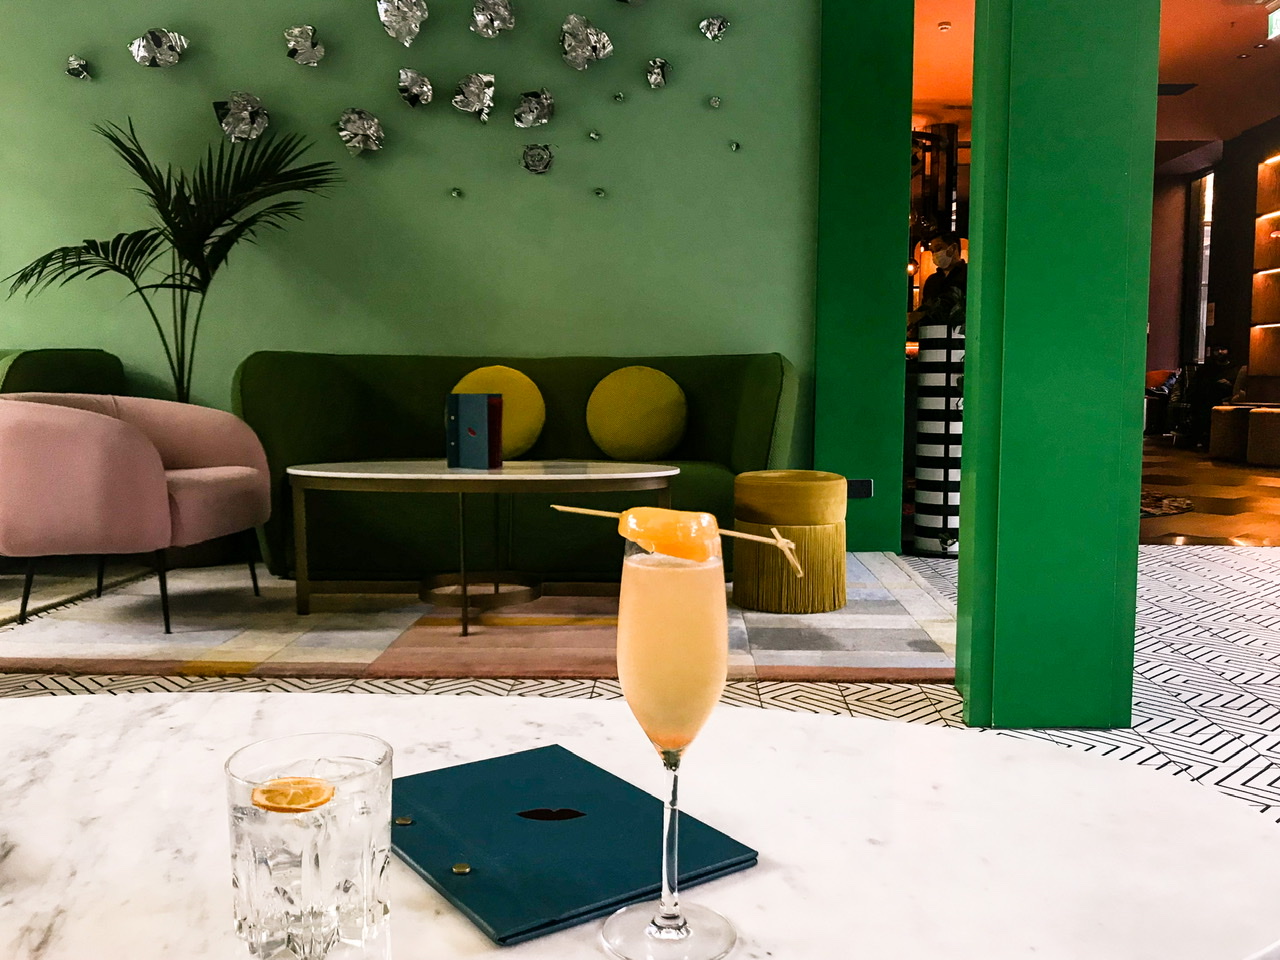 Room with bright green walls and art deco couch with champagne cocktail decorated with a lychee and glass of water containing a lemon slice placed next to closed bar menu on table